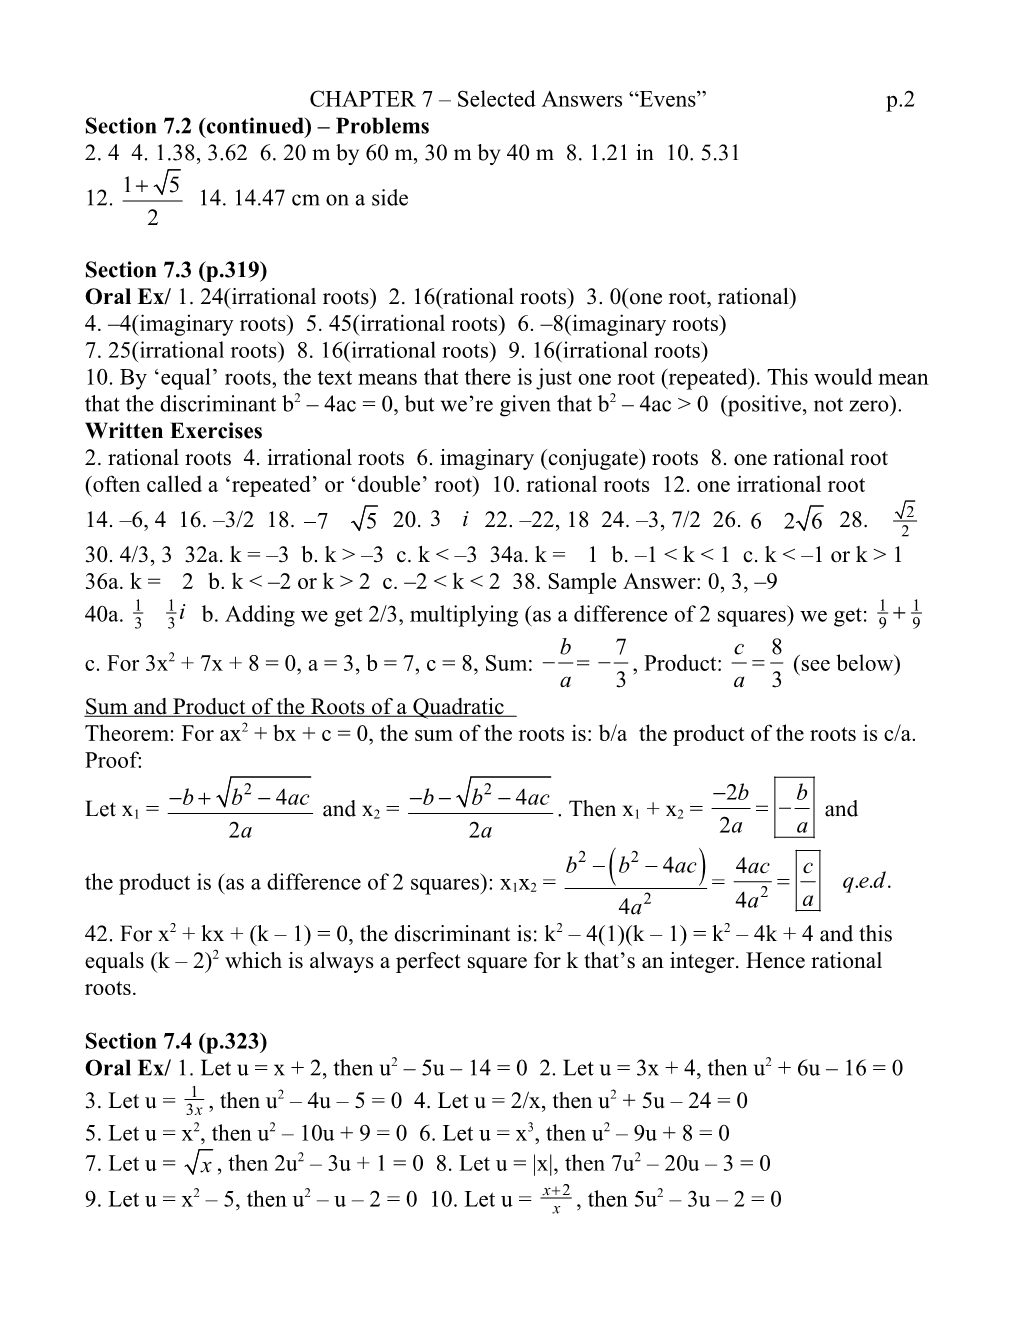 CHAPTER 7 Selected Answers Evens